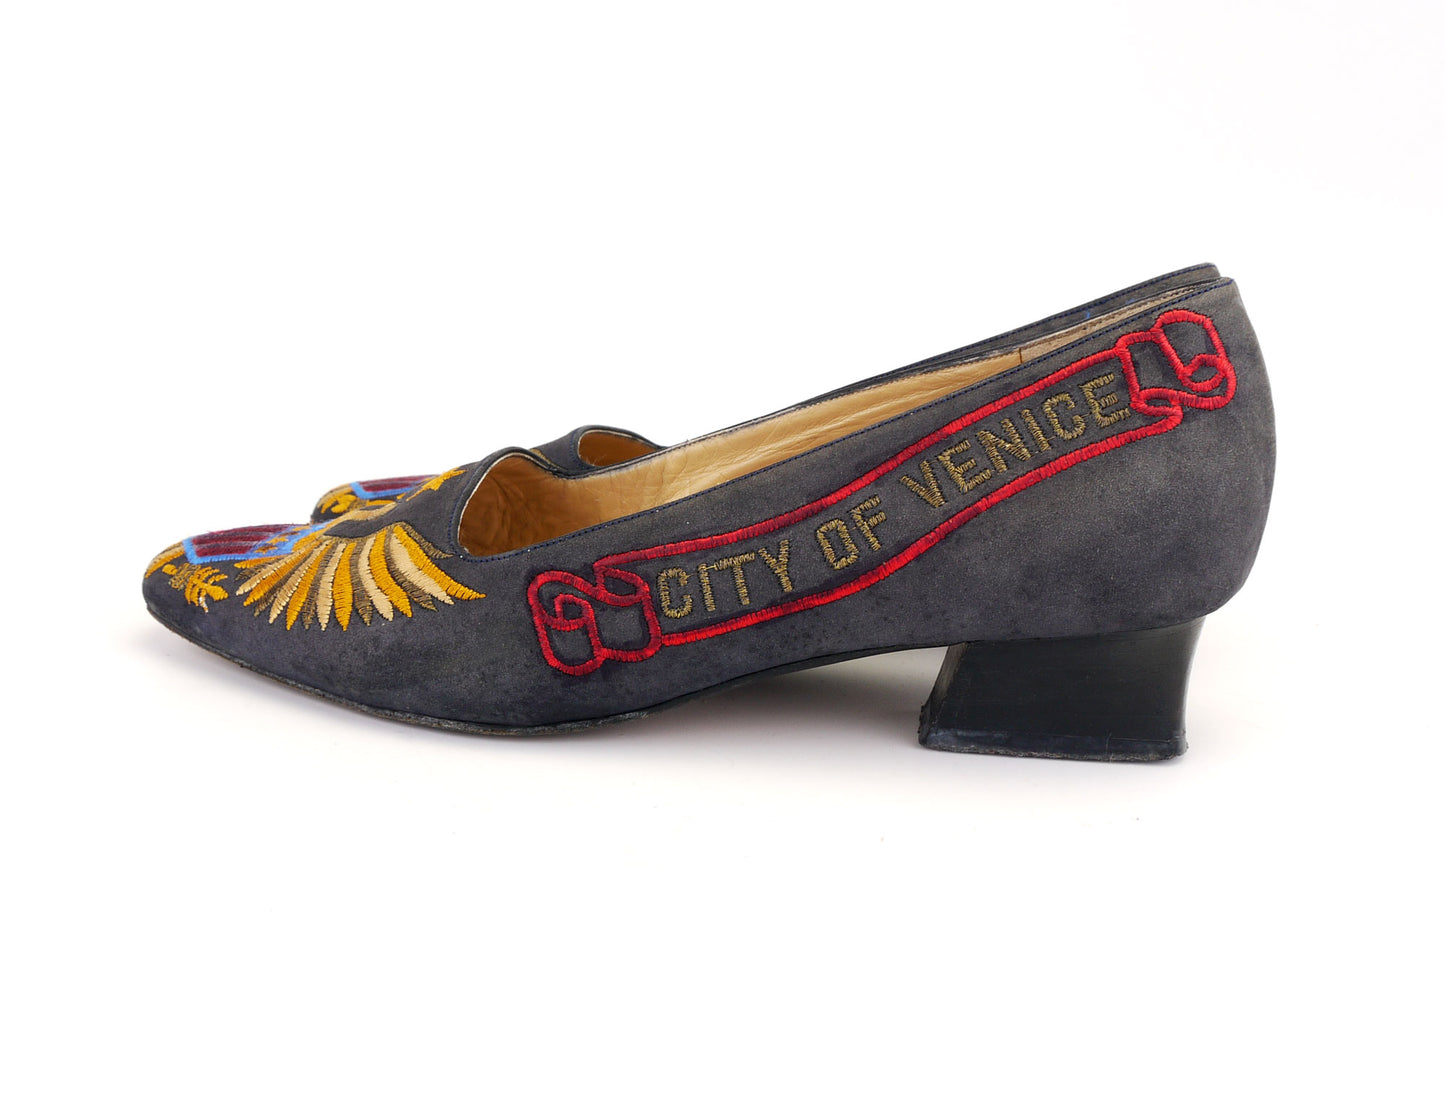 80s Embroidered City of Venice Flat Pumps UK 3